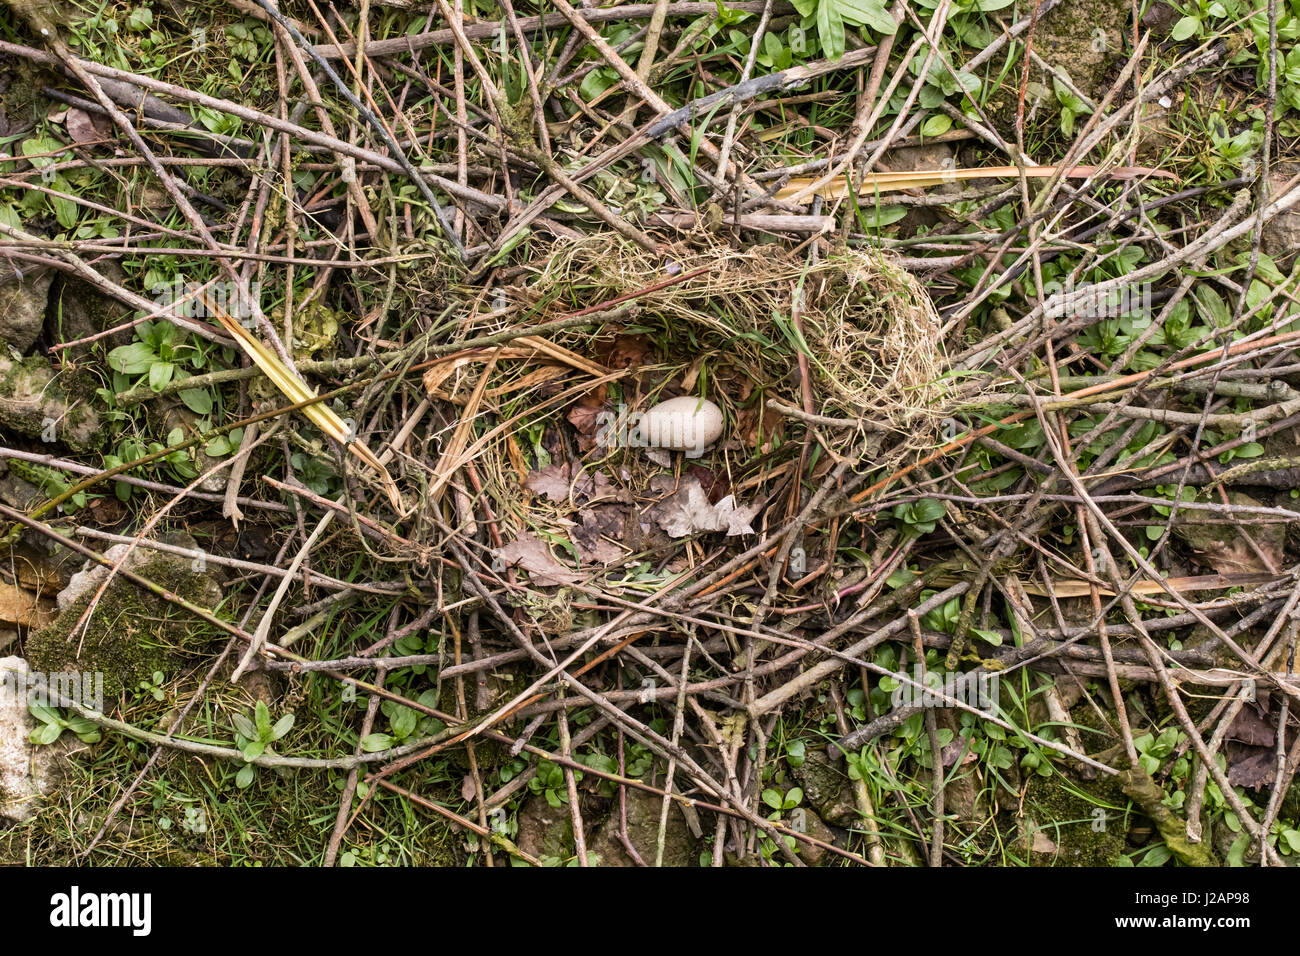 Coot (Fulica atra) egg in nest. Single speckled egg in nest made of sticks lined with grass and leaves, of bird in the family Rallidae Stock Photo